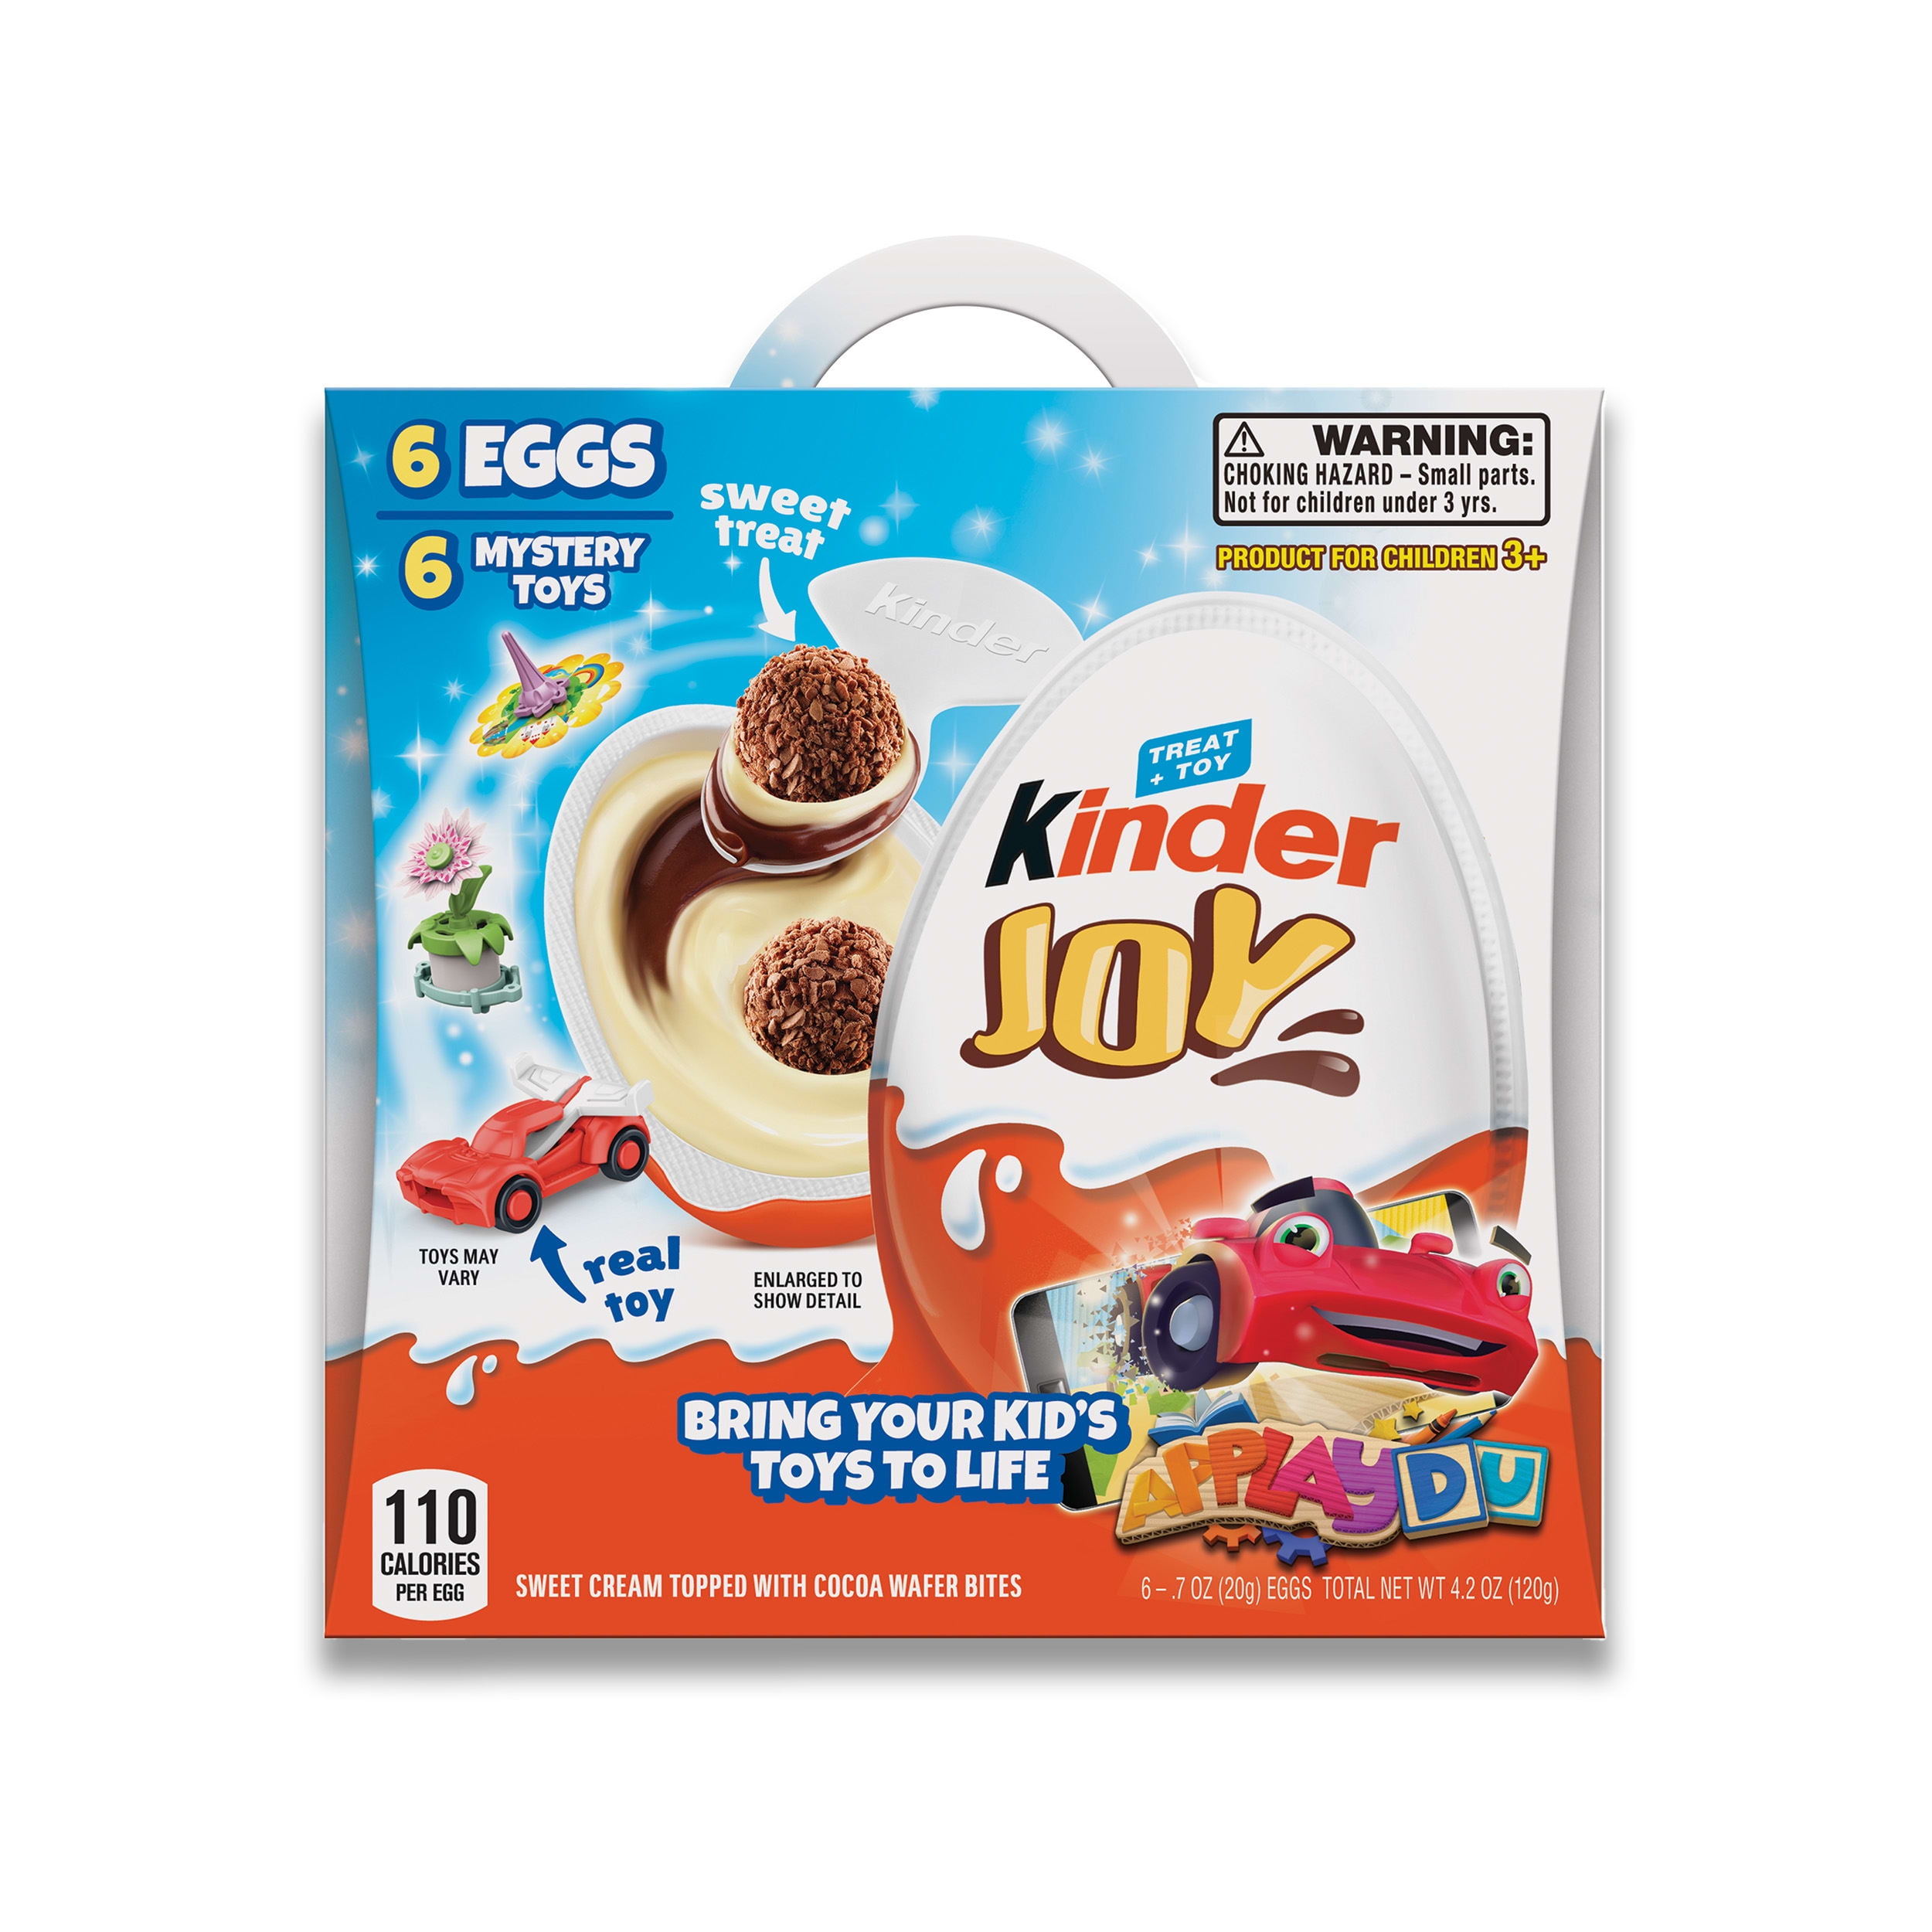 Kinder Joy Eggs, Sweet Cream and Chocolatey Wafers with Toy Inside, Great for Easter Egg Hunts, 4.2 oz, 6 Eggs